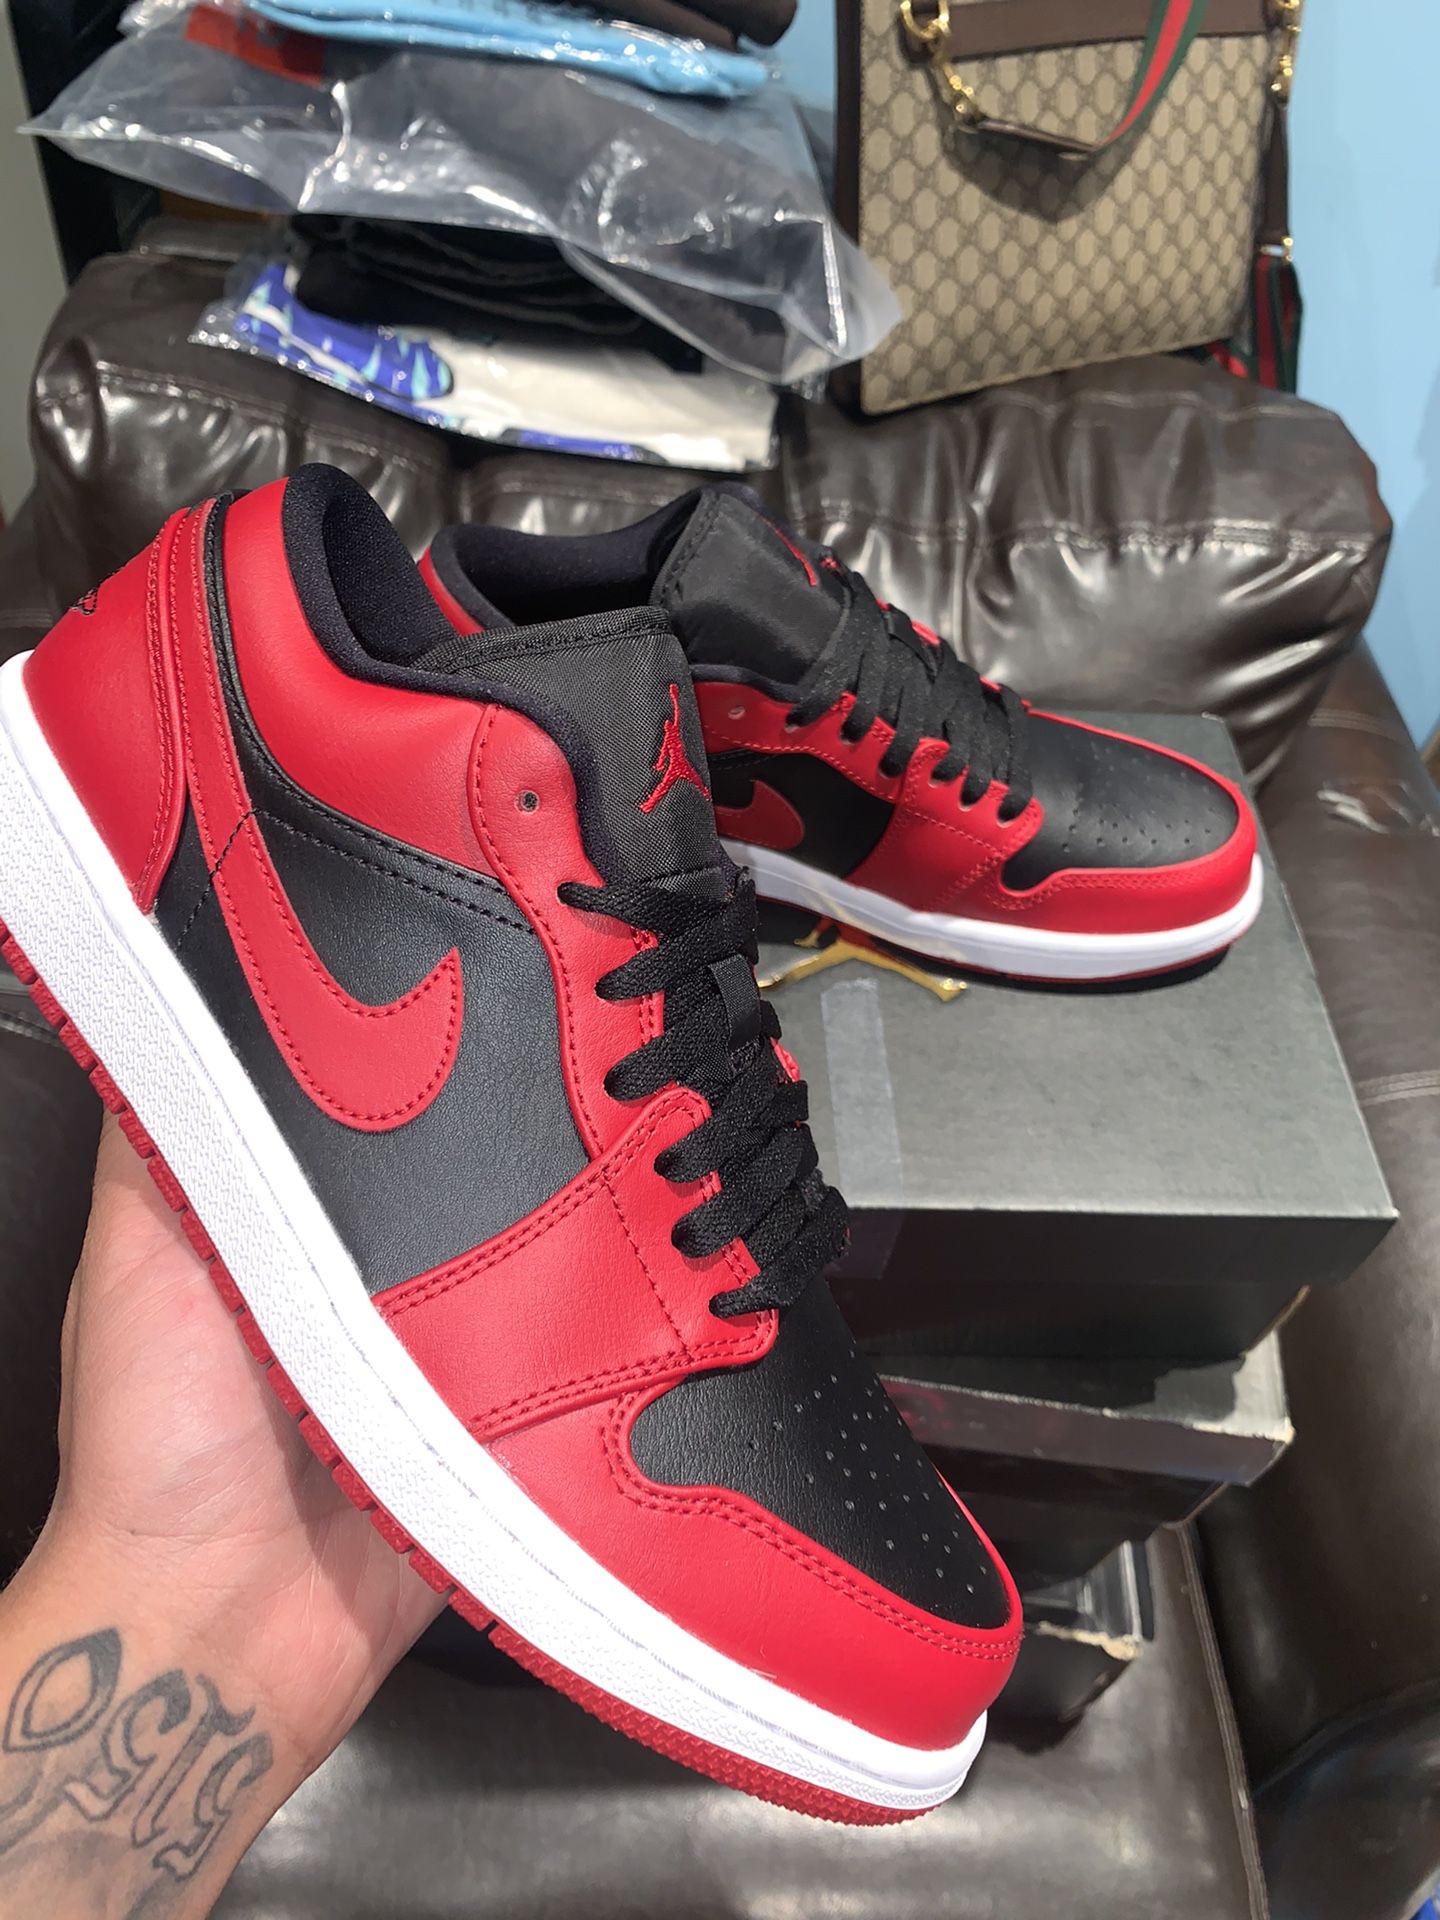 Early IN HAND Jordan 1 low bred/ reverse bred SZ 8.5 100% AUTHENTIC